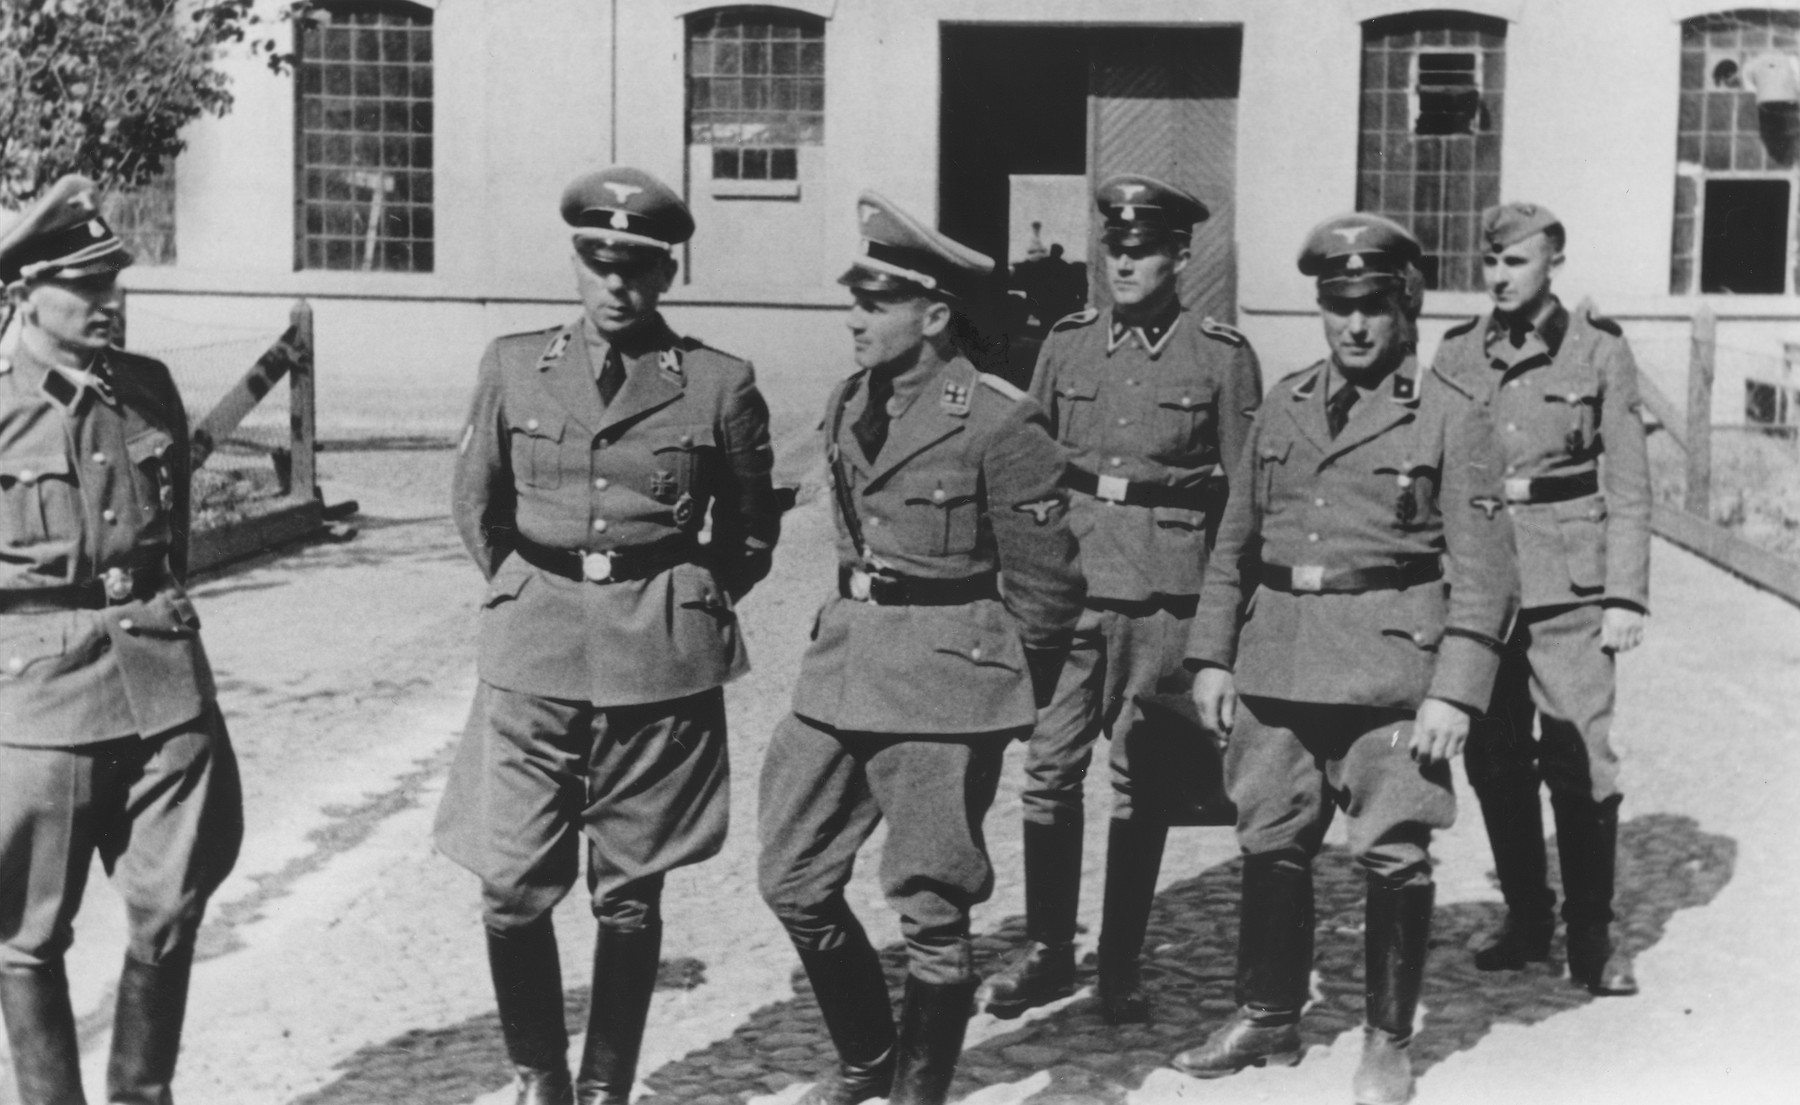 Nazi officials pay a visit to the Jugendschutzlager Litzmannstadt, a concentration camp for Polish juveniles in Lodz.

Pictured second from the left is SS-Brigadefuehrer Otto Hofmann.